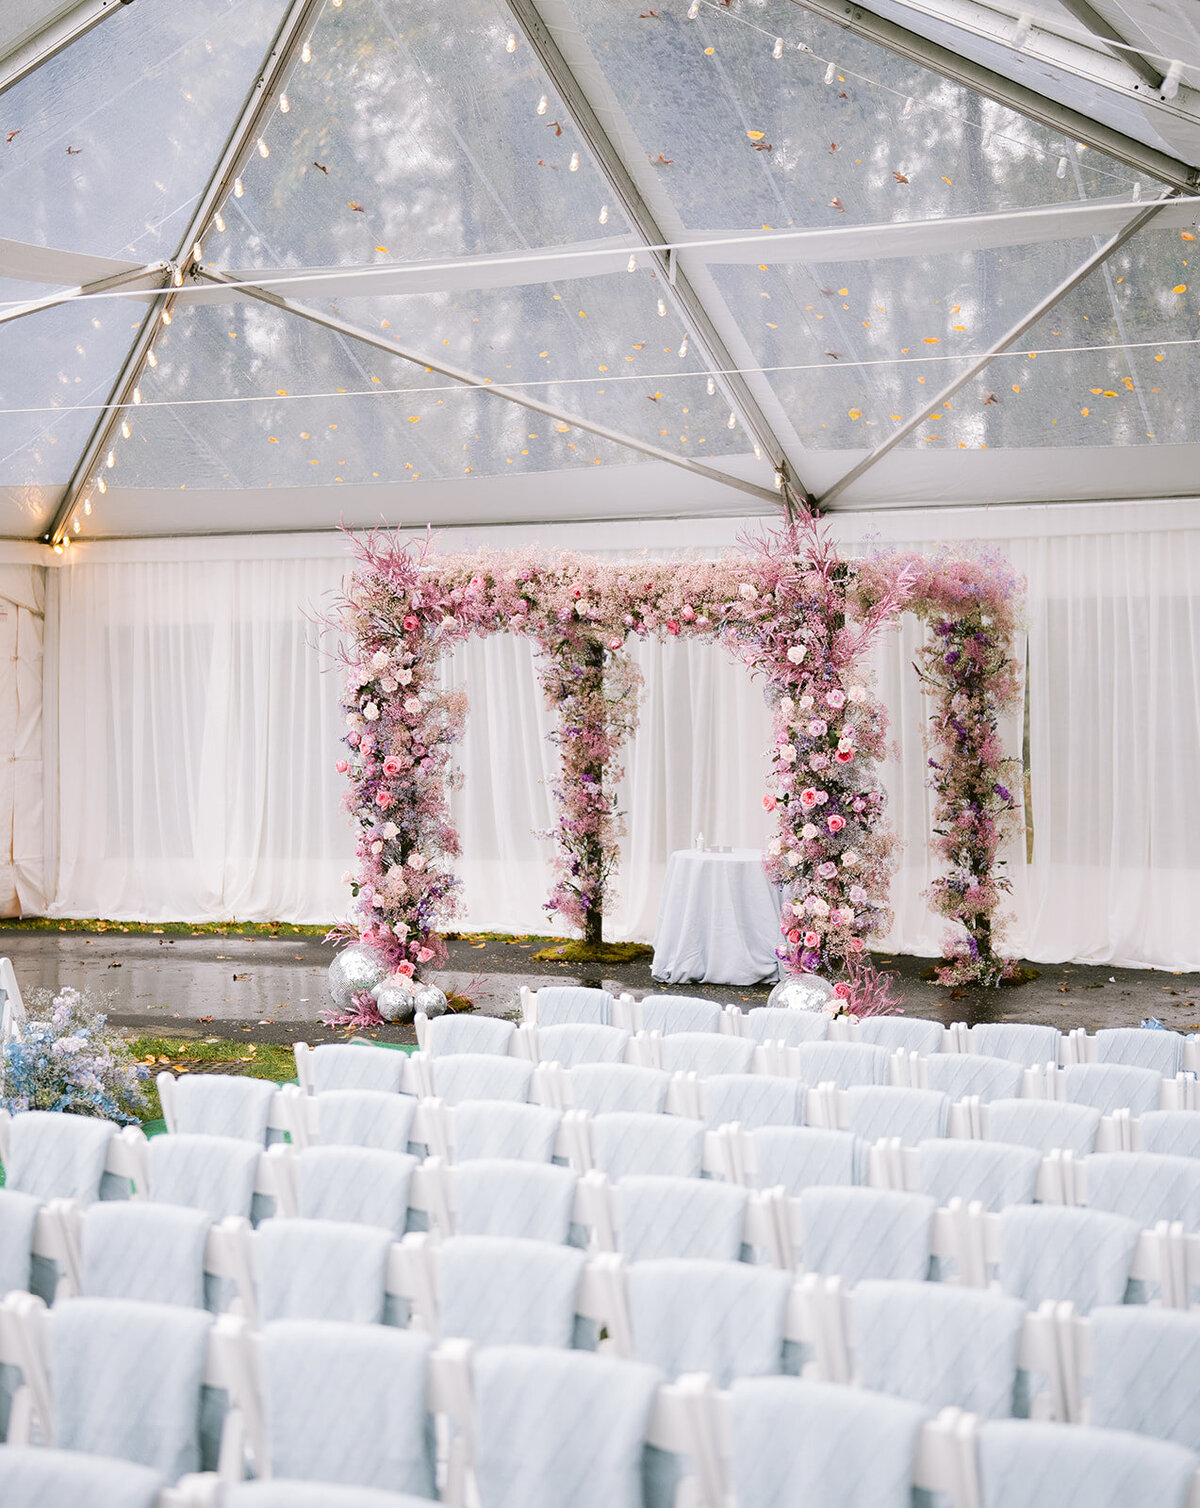 light-pink-colorful-wedding-flowers-ceremony-arch-fixture-floral-installation-enza-events-katonah-tented-wedding